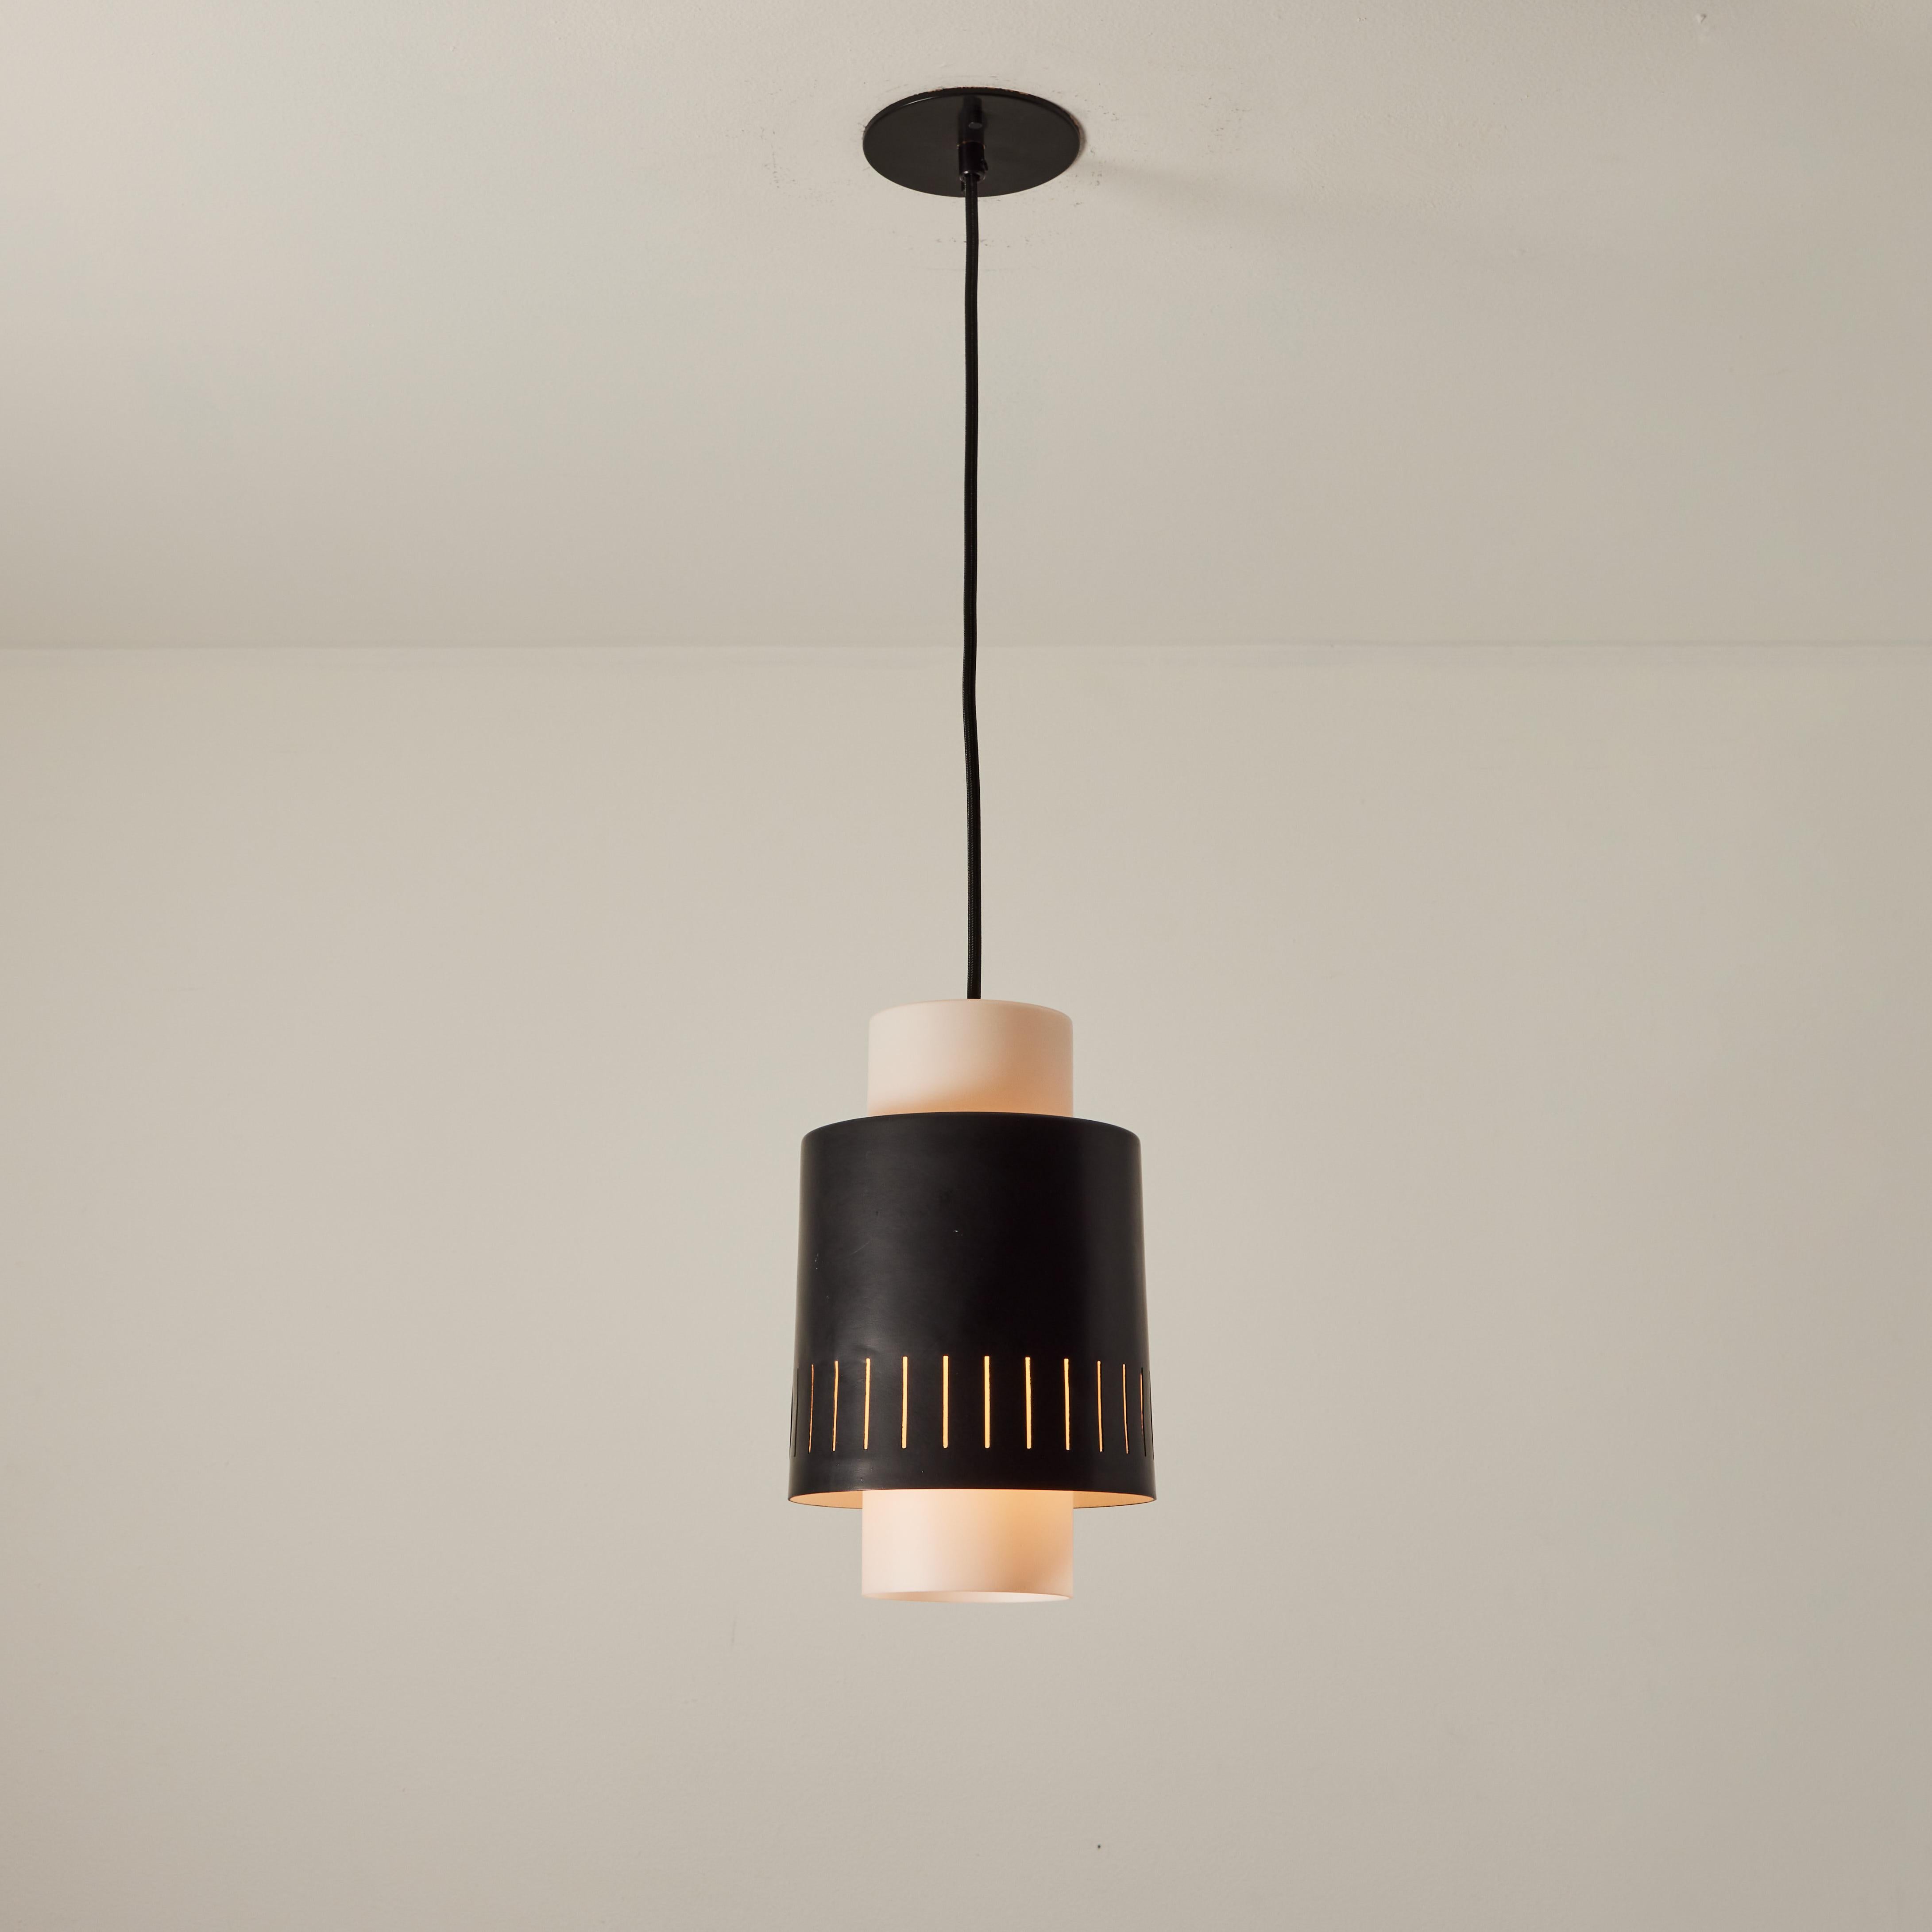 1950s Glass & perforated metal pendant attributed to Bruno Gatta for Stilnovo. A quintessentially 1950s Italian design executed in opaline glass and black painted metal. A highly functional and sculptural suspension light of attractive scale and